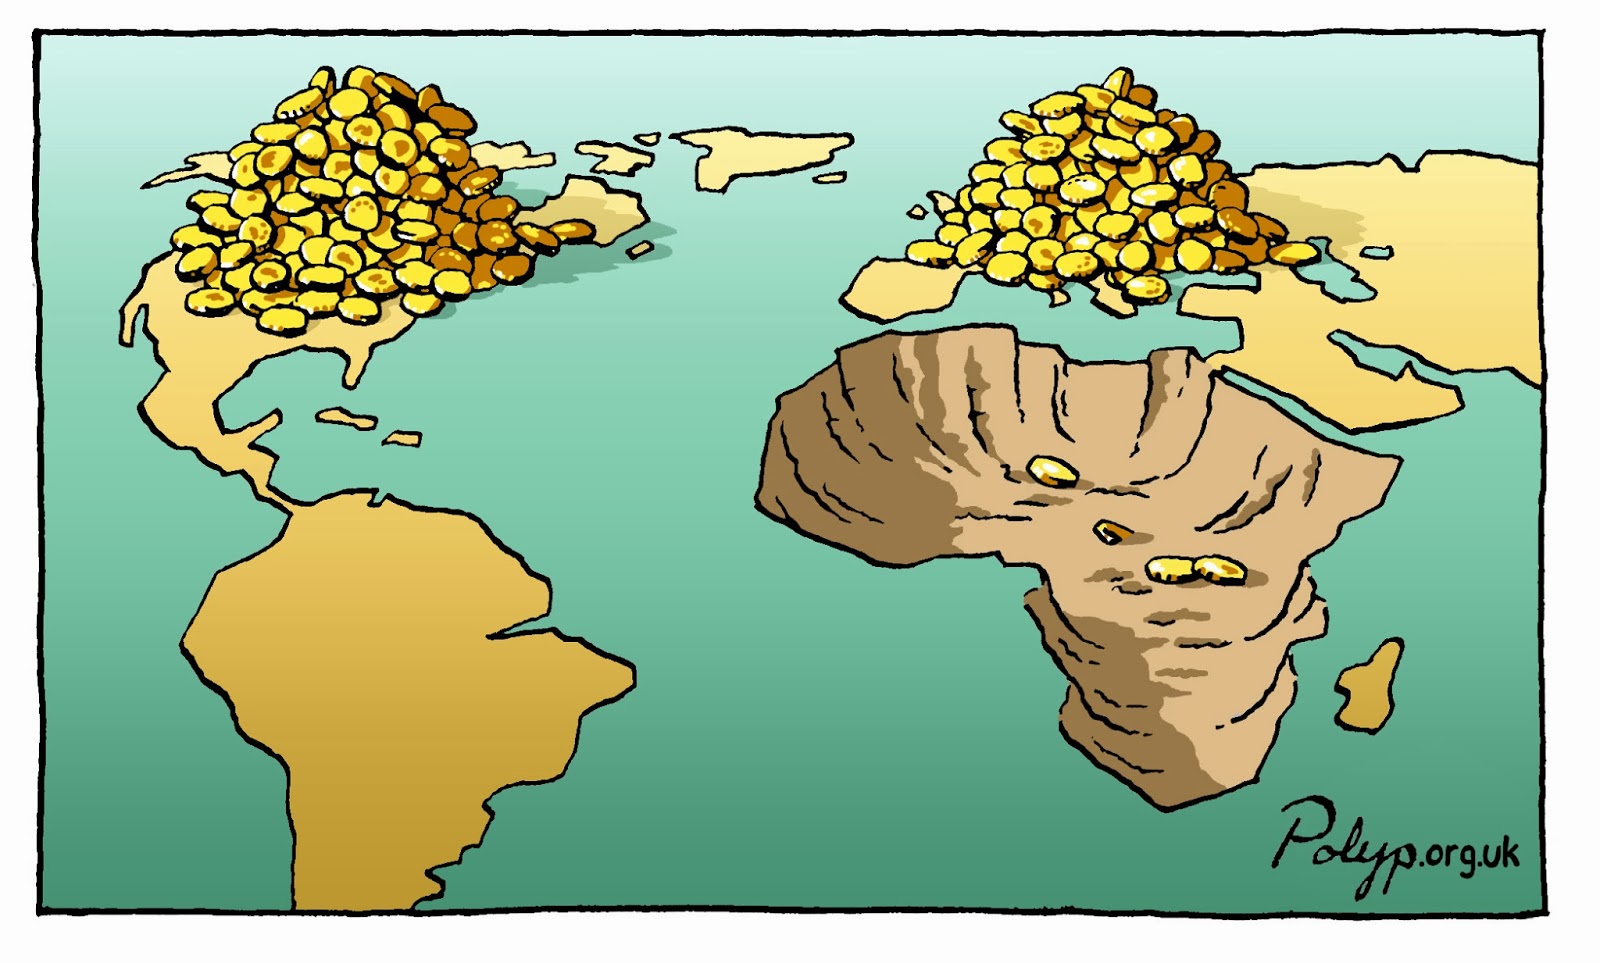 Illustrated map of the world. The African continent is mined out and empty. Gold coins are piled on North America and Europe